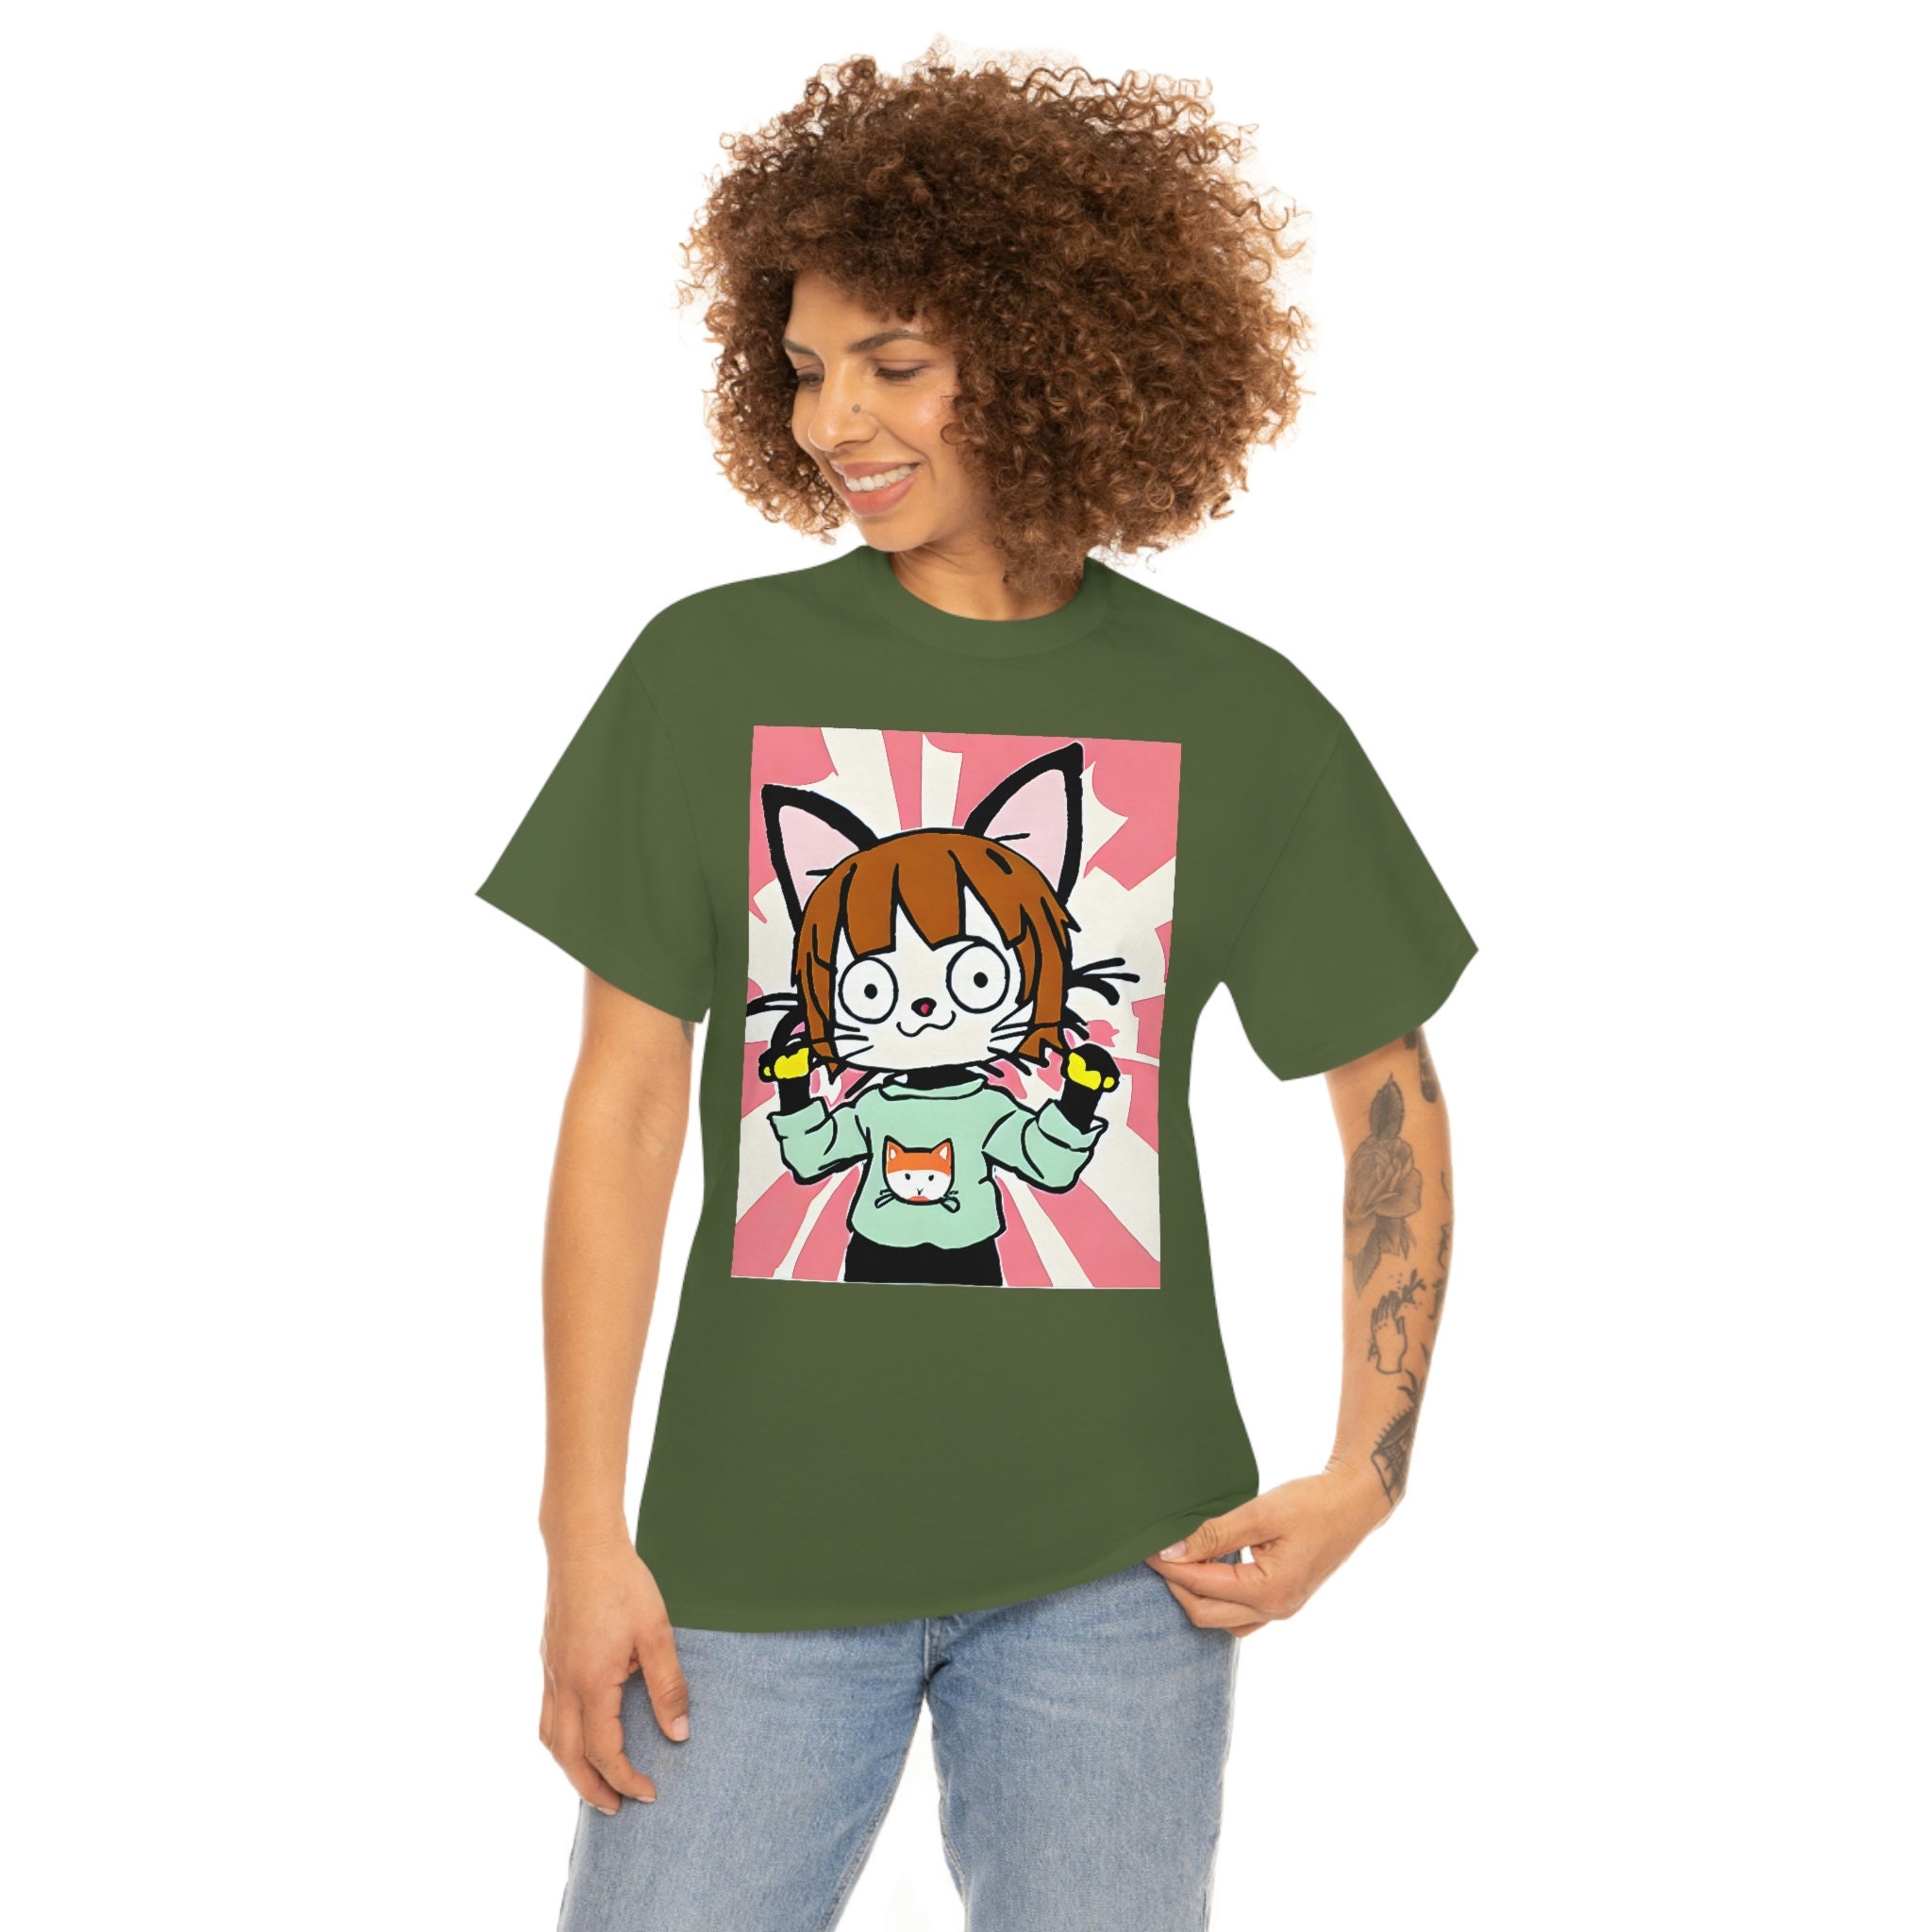 Femboy Hooters 100% Recycled T-shirt Femboy Clothes Weeb Femboys Sissies  LGBTQIA Catboy -  Sweden